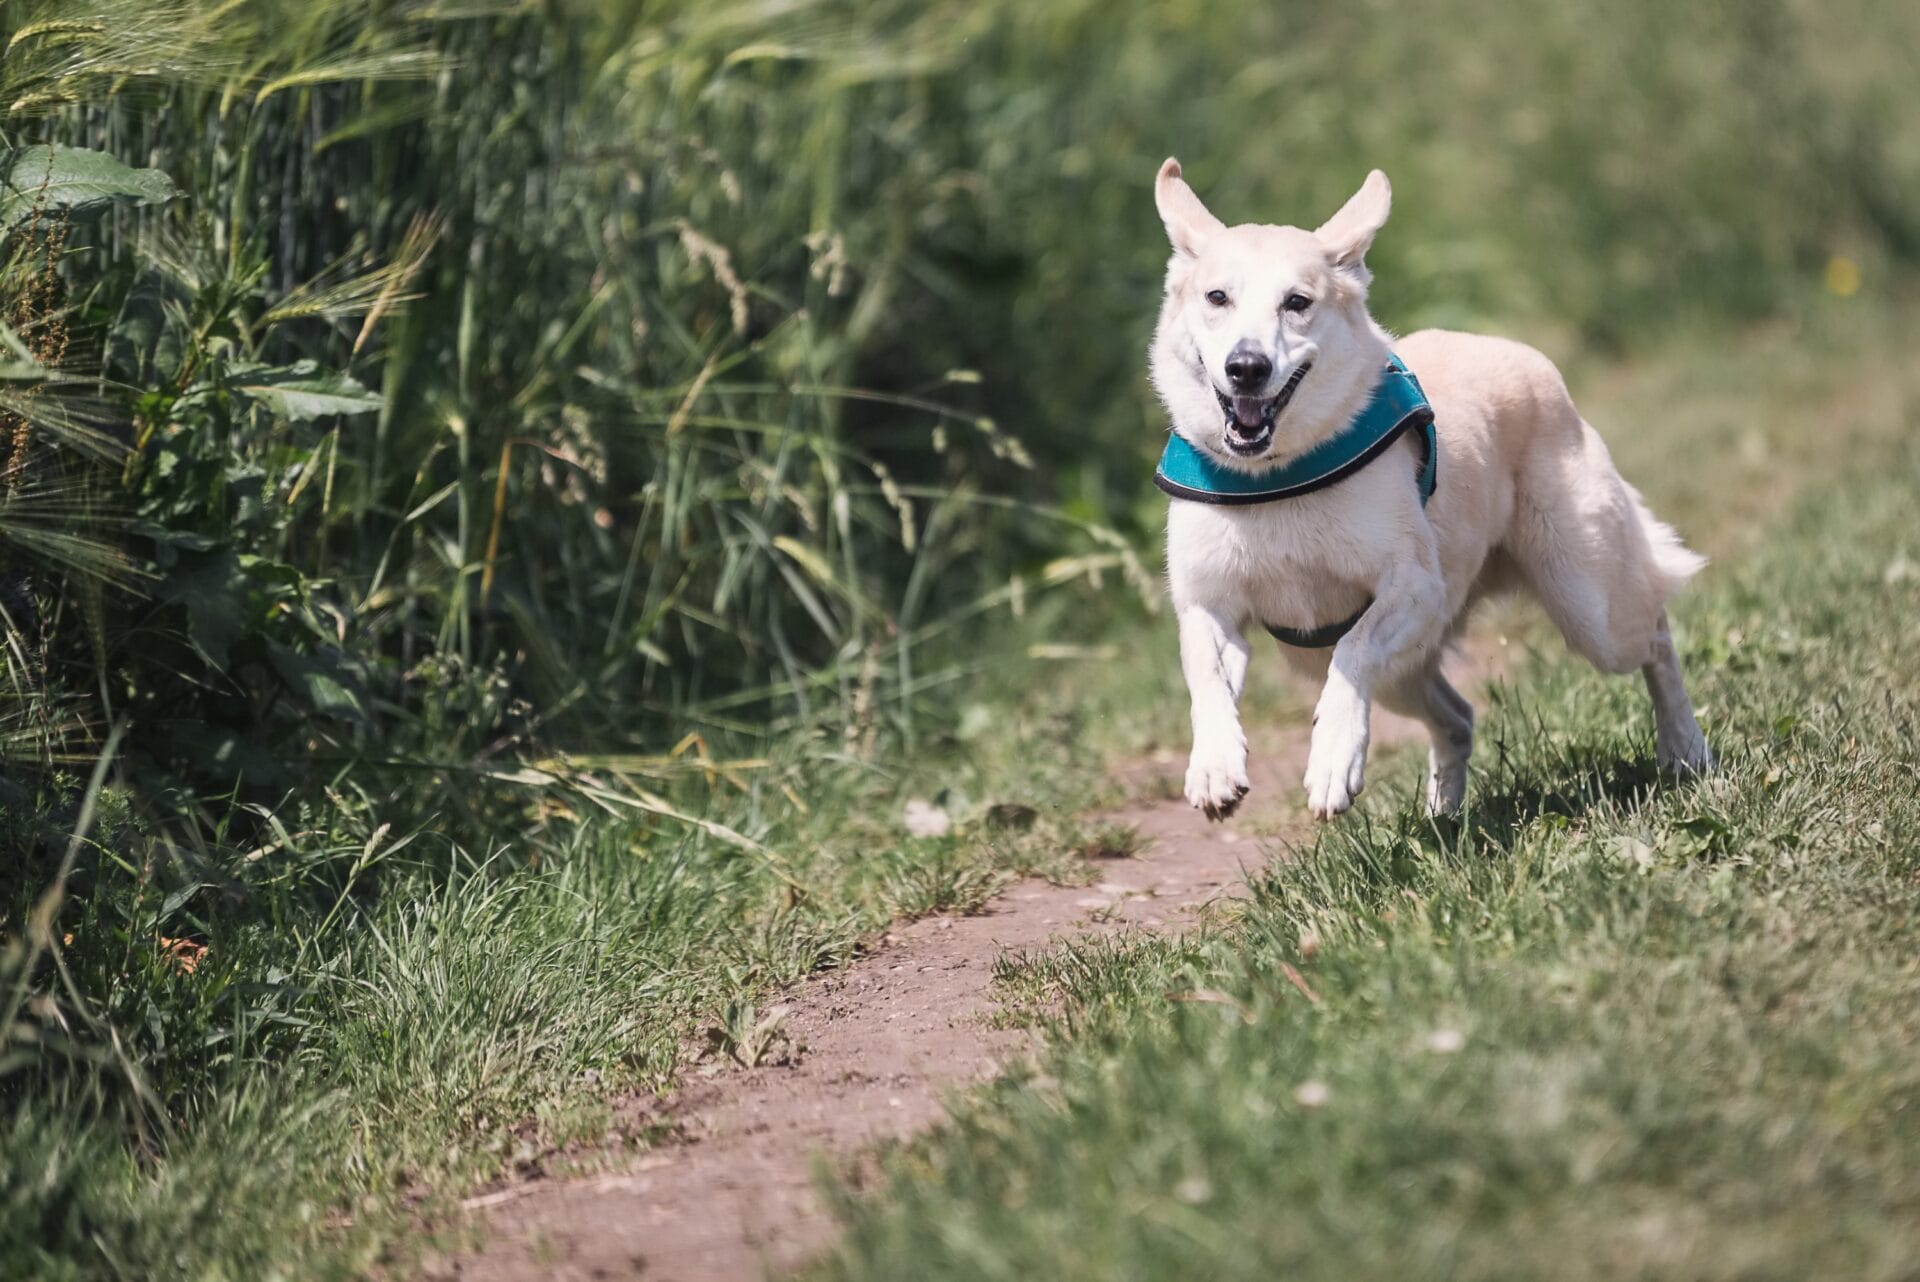 dog showing behavior and body language by running outside